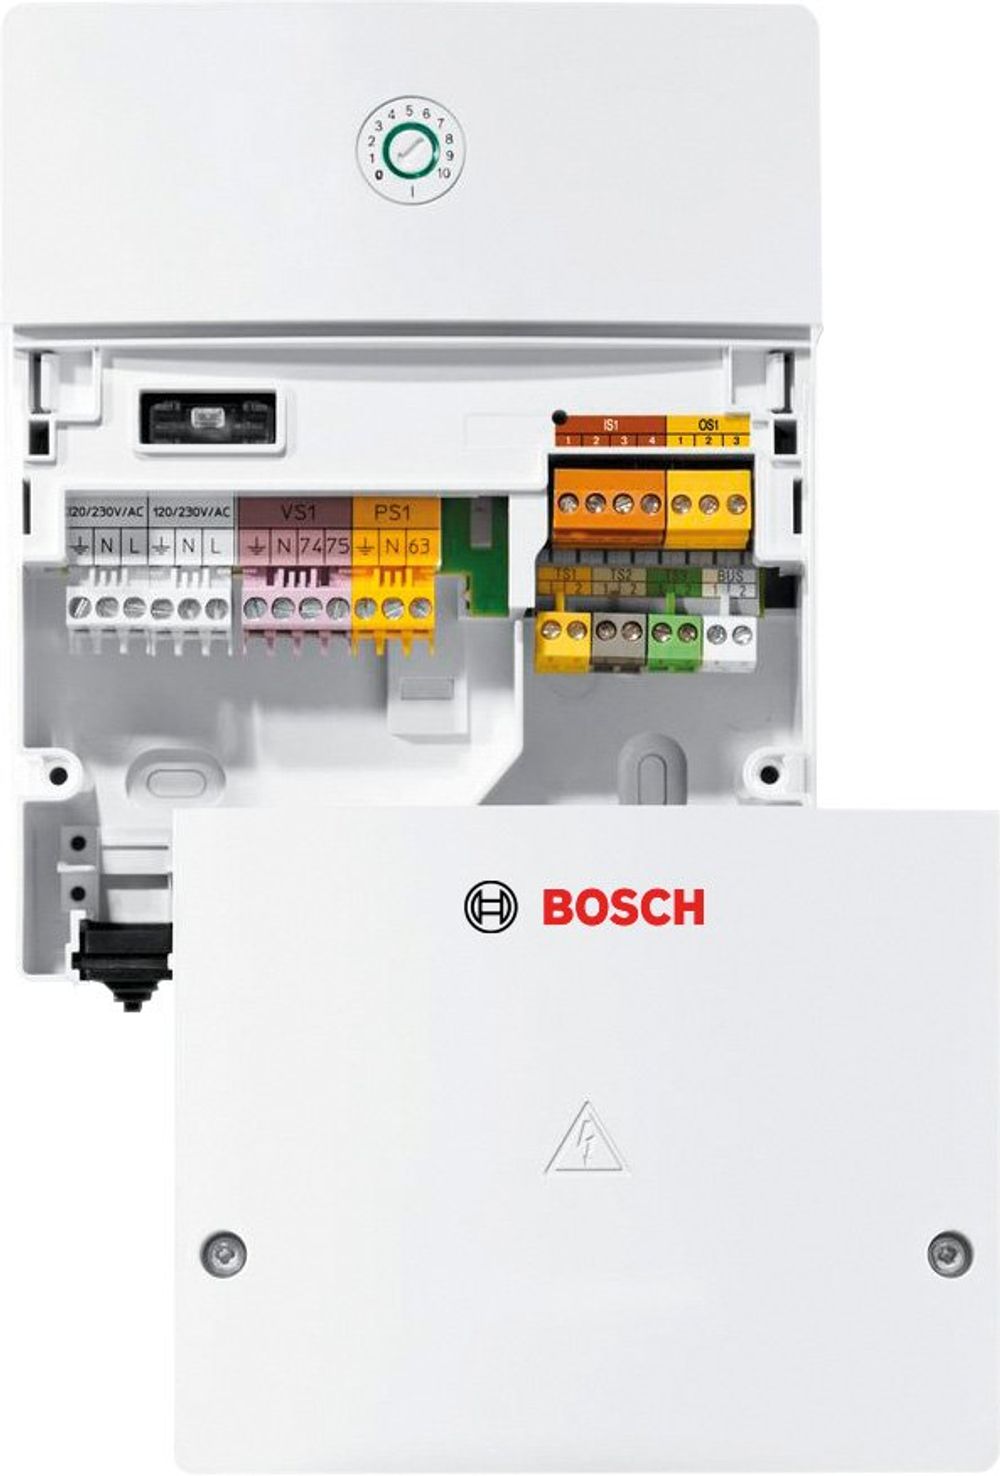 https://raleo.de:443/files/img/11ee9cbc7821cd909108c9bcd3c8387f/size_l/BOSCH-Modul-MS100-everp-8737705405 gallery number 1